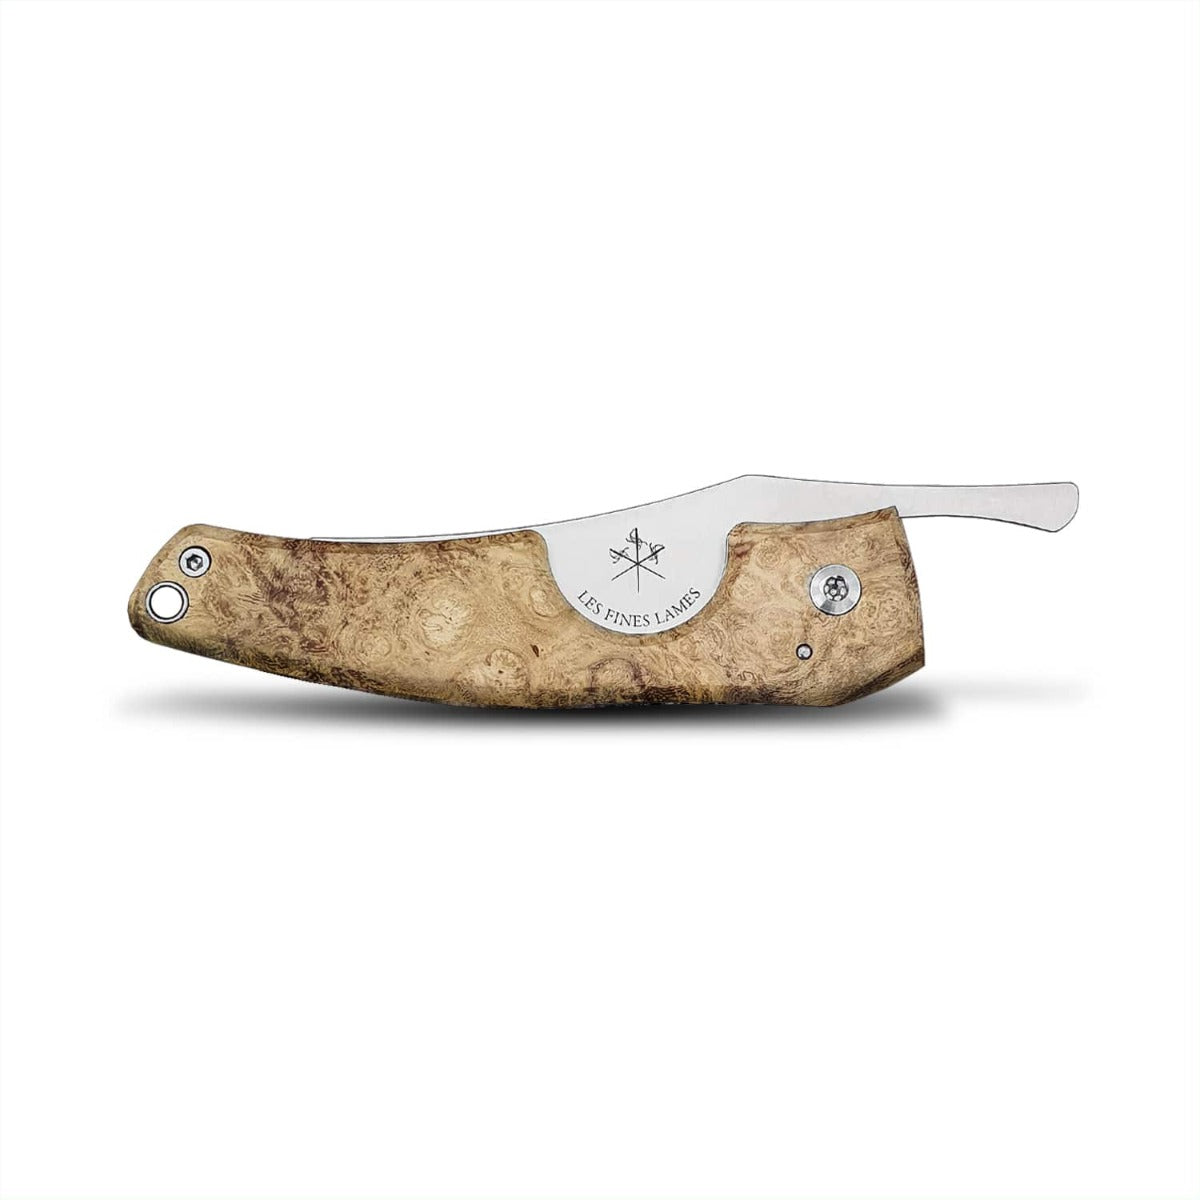 A rot-proof, friction folder Kirby Allison Acacia Burl Cigar Knife with a wooden handle on a white background.